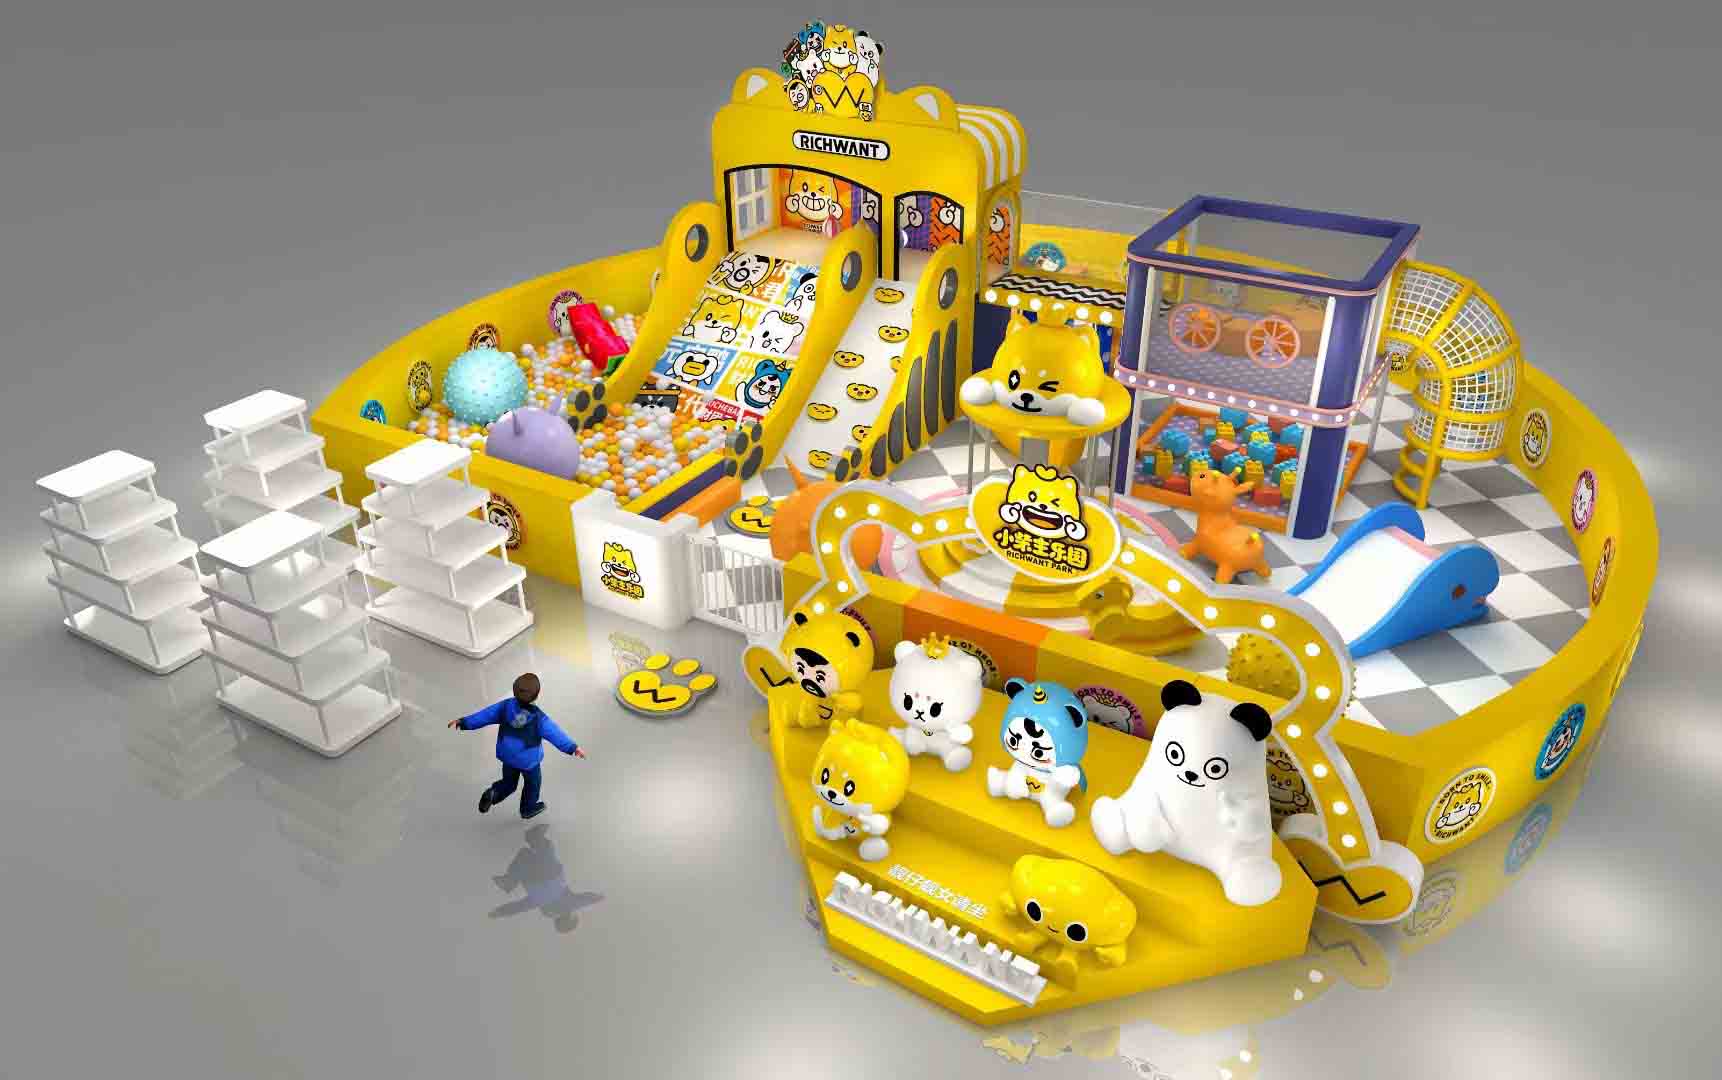 Combination of Animation IP and indoor playground